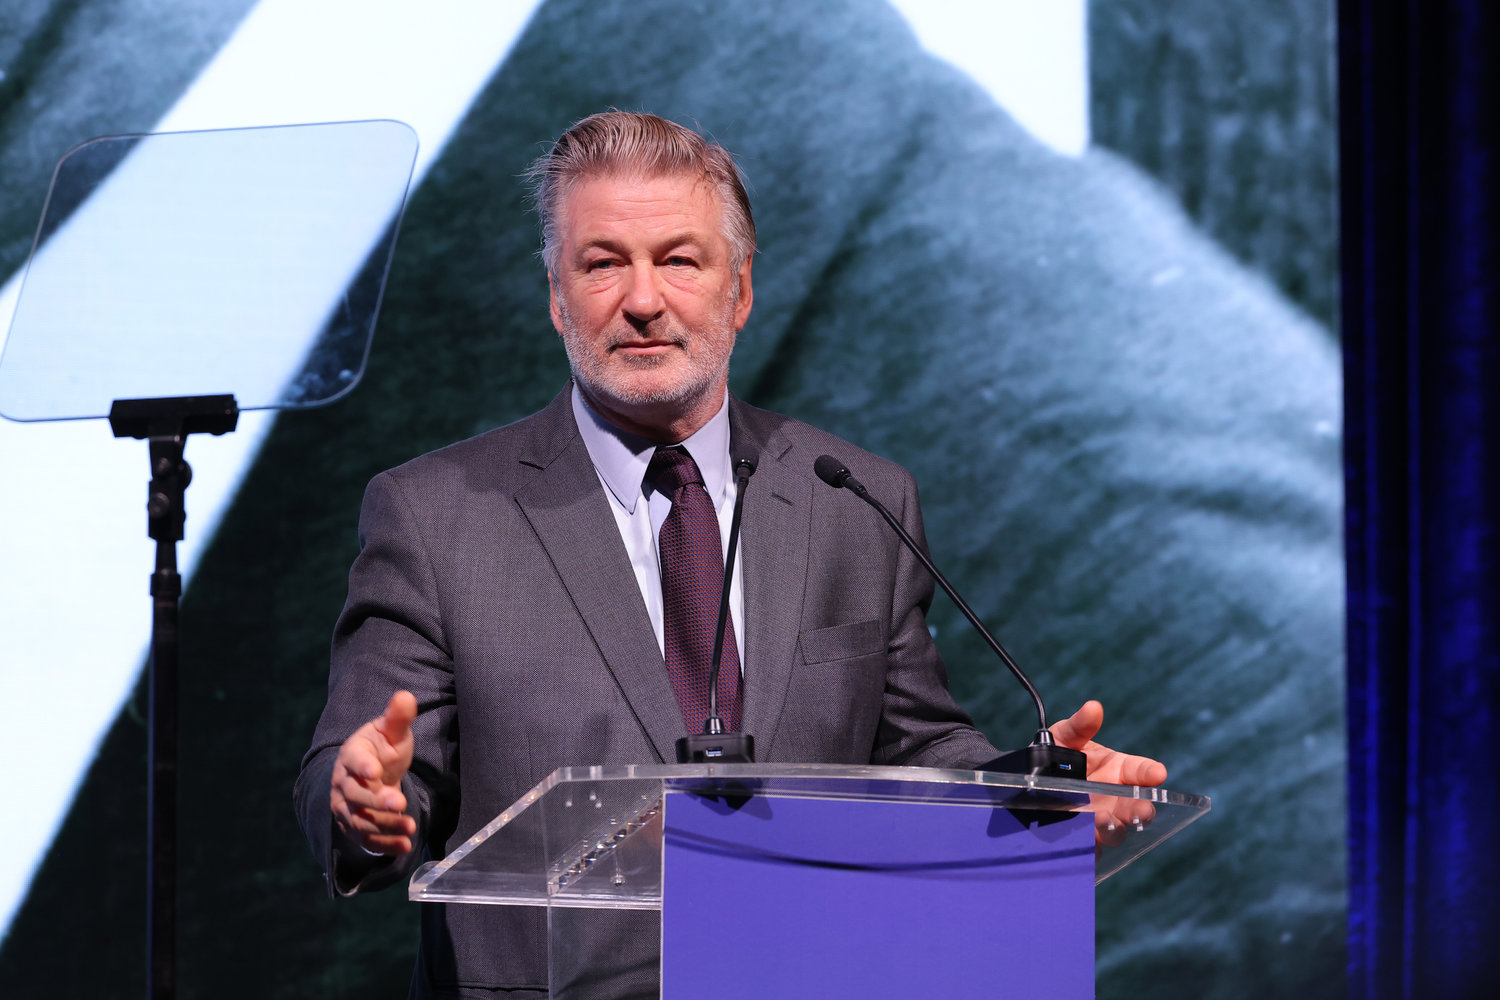 In this photo from Dec. 6, 2022 , Alec Baldwin speaks onstage at the 2022 Robert F. Kennedy Human Rights Ripple of Hope Gala at New York Hilton in New York City. (Mike Coppola/Getty Images for 2022 Robert F. Kennedy Human Rights Ripple of Hope Gala/TNS)